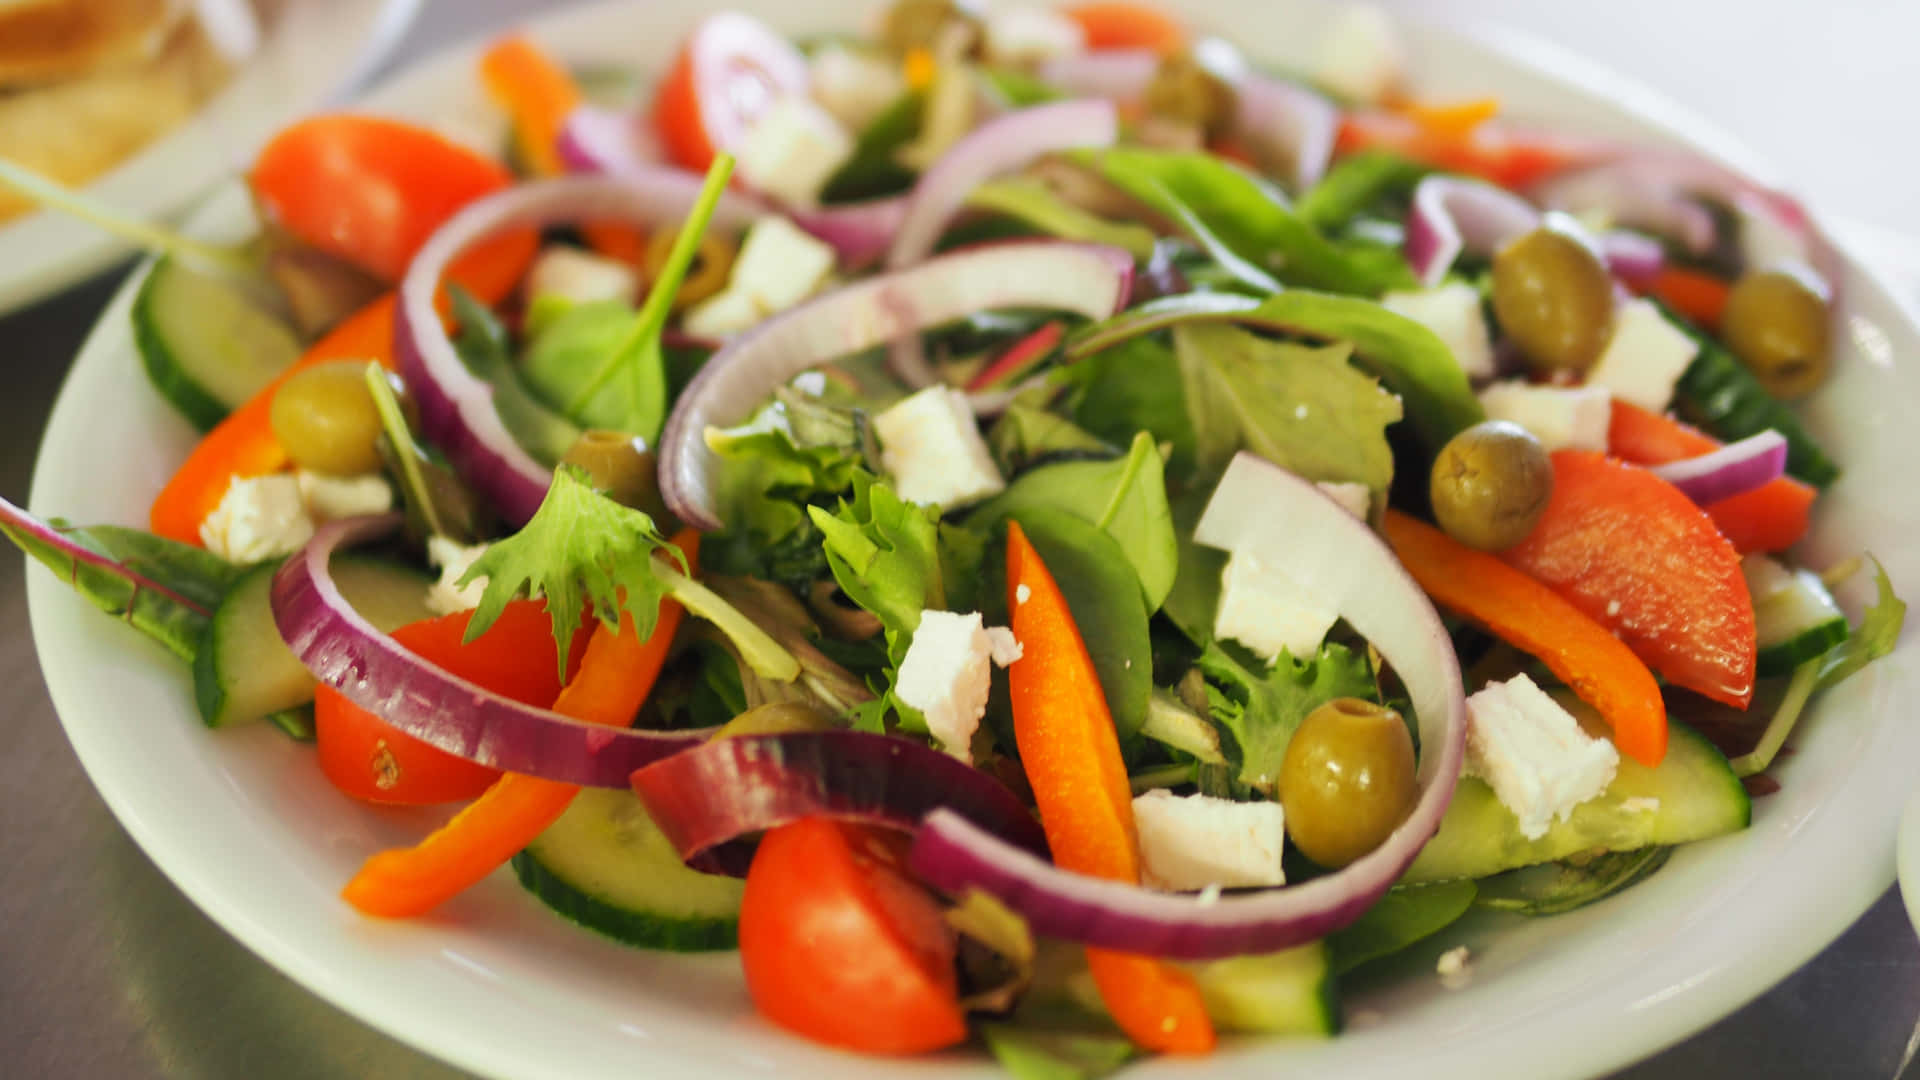 Enjoy a healthy and delicious salad full of fresh ingredients